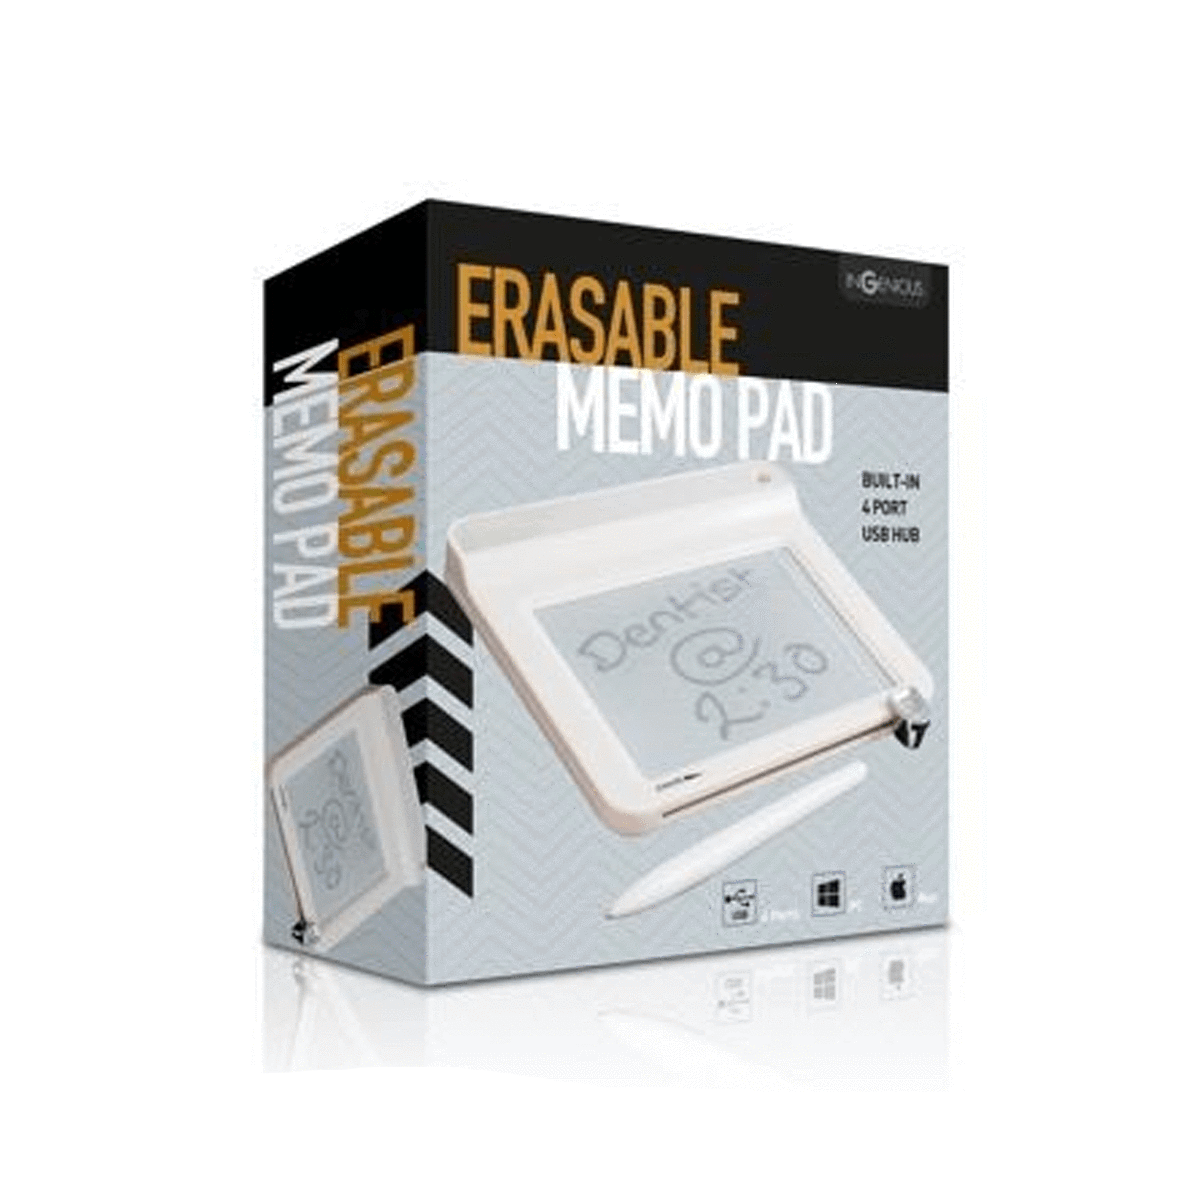 Red5 Erasable Memo Pad with USB Port